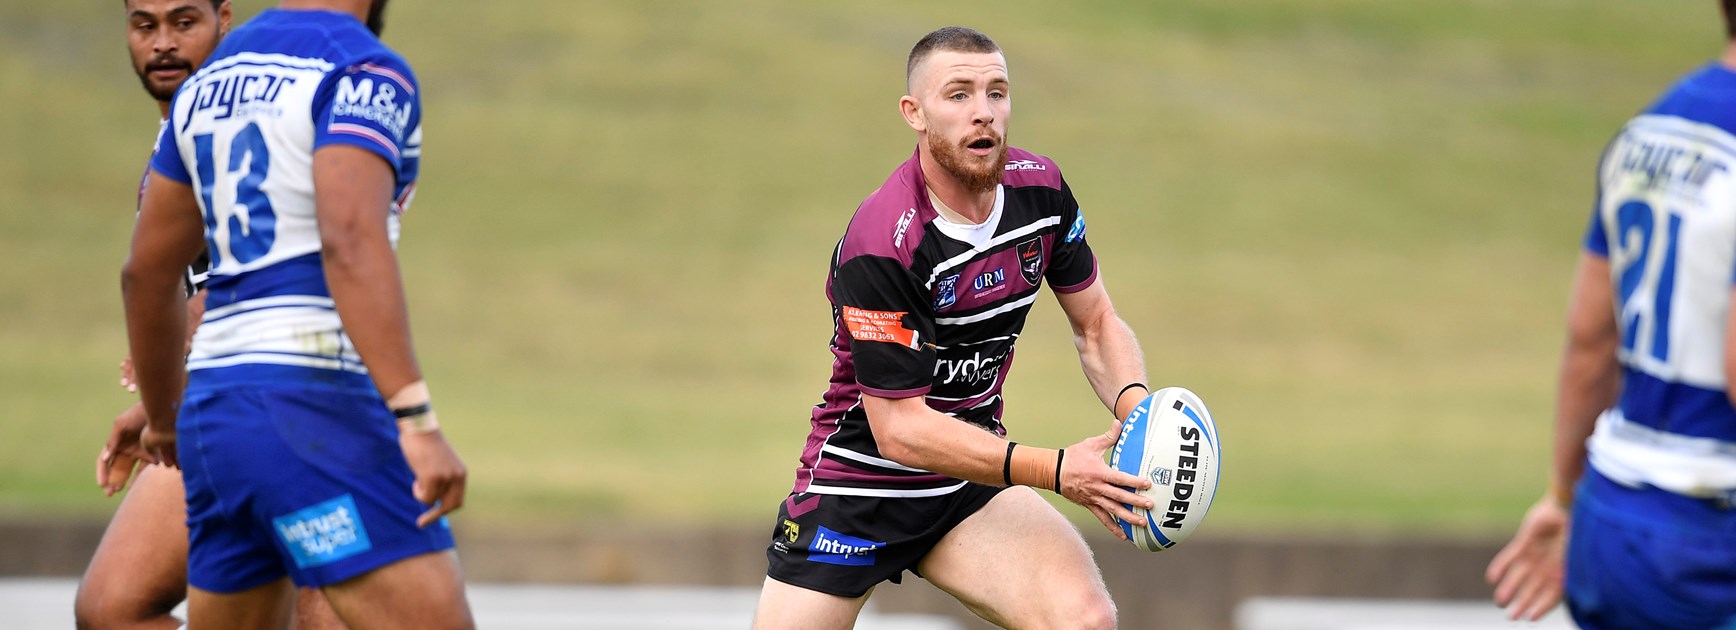 Hastings will be recalled to NRL squad, says Manly CEO